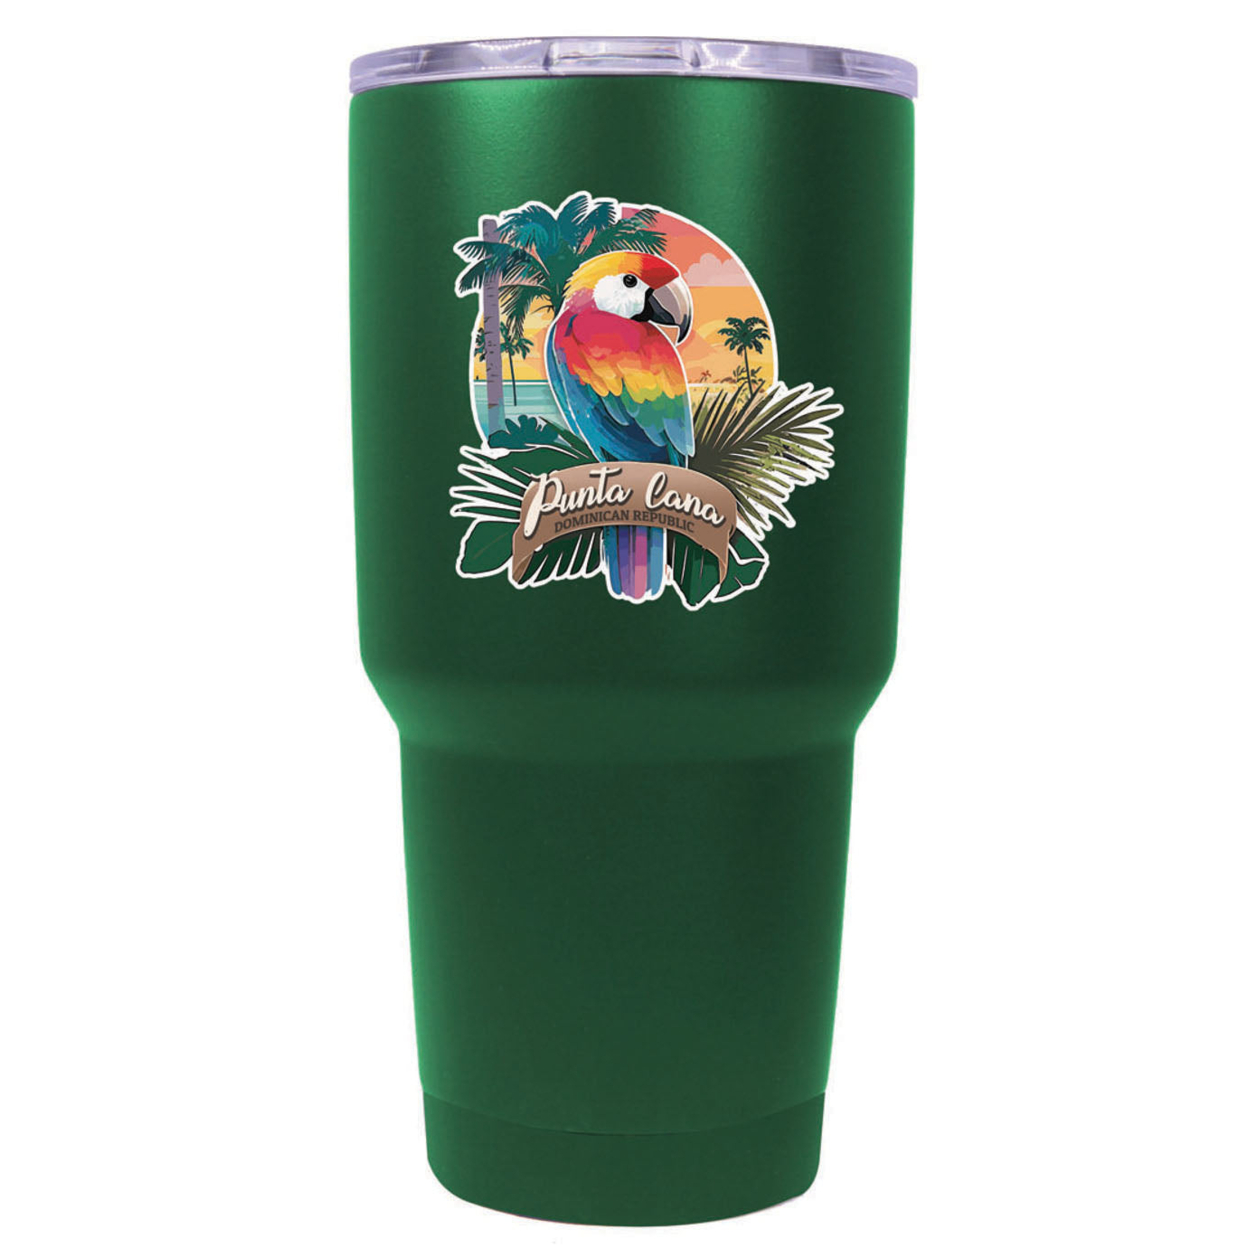 Punta Cana Dominican Republic Souvenir 24 Oz Insulated Stainless Steel Tumbler - Green, PARROT